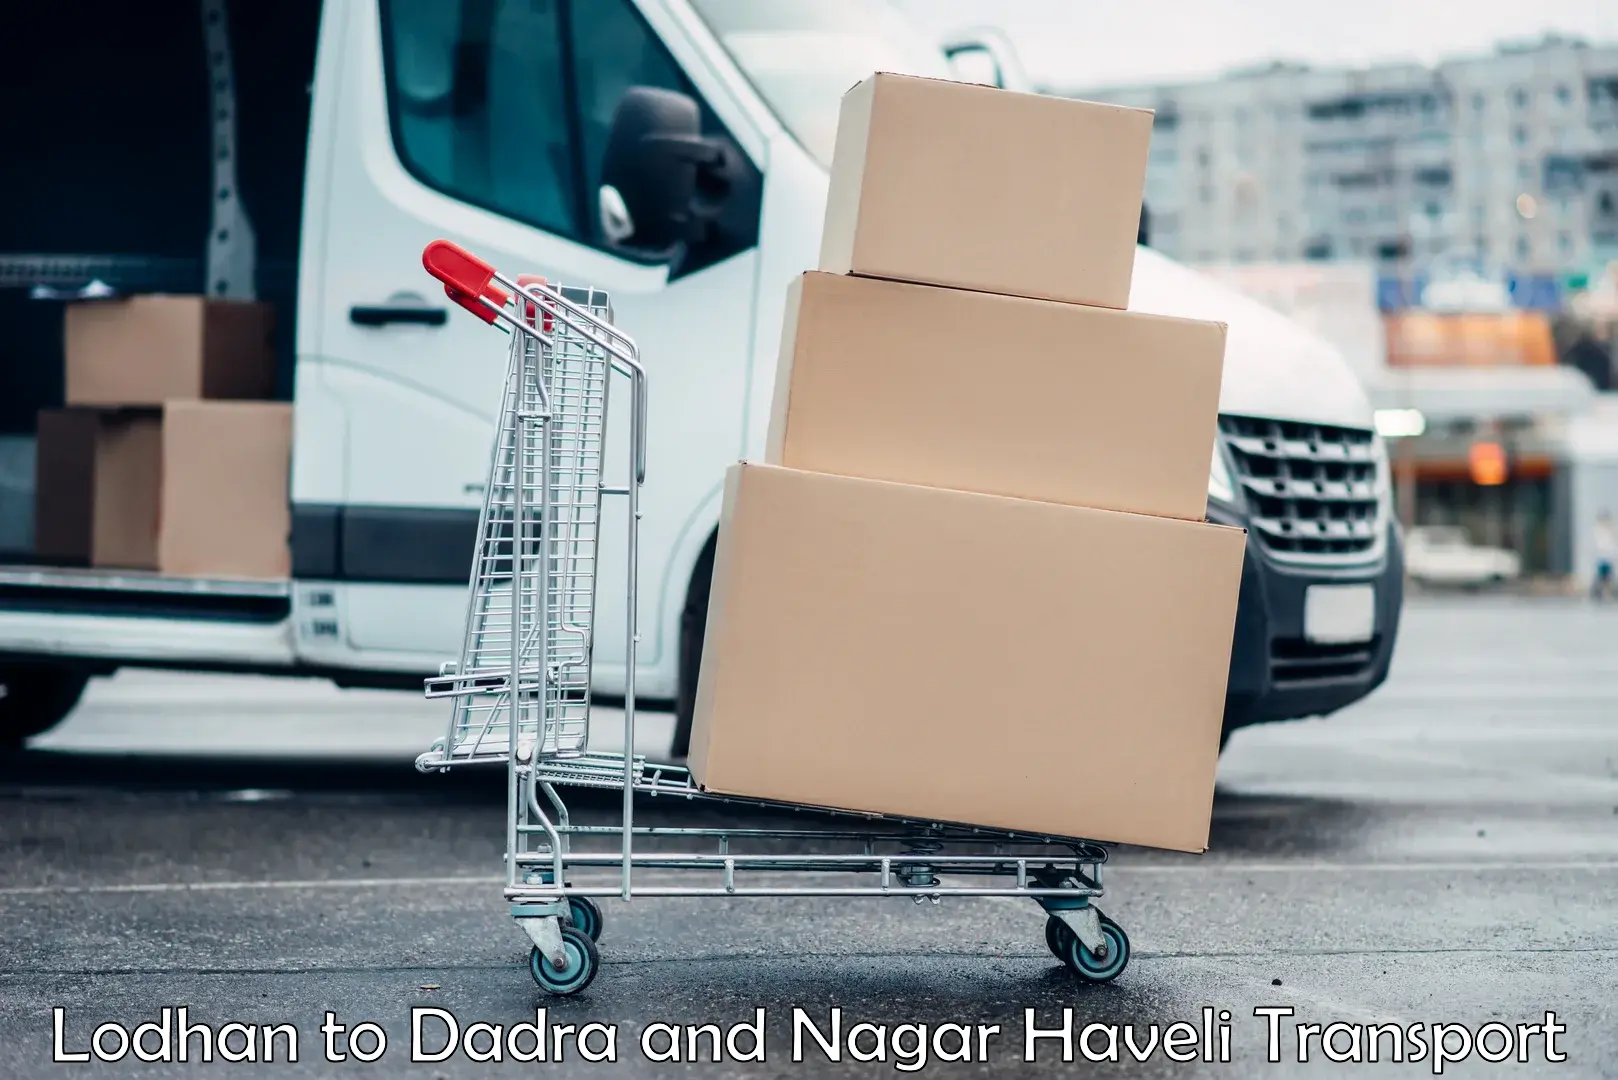 Shipping services in Lodhan to Dadra and Nagar Haveli